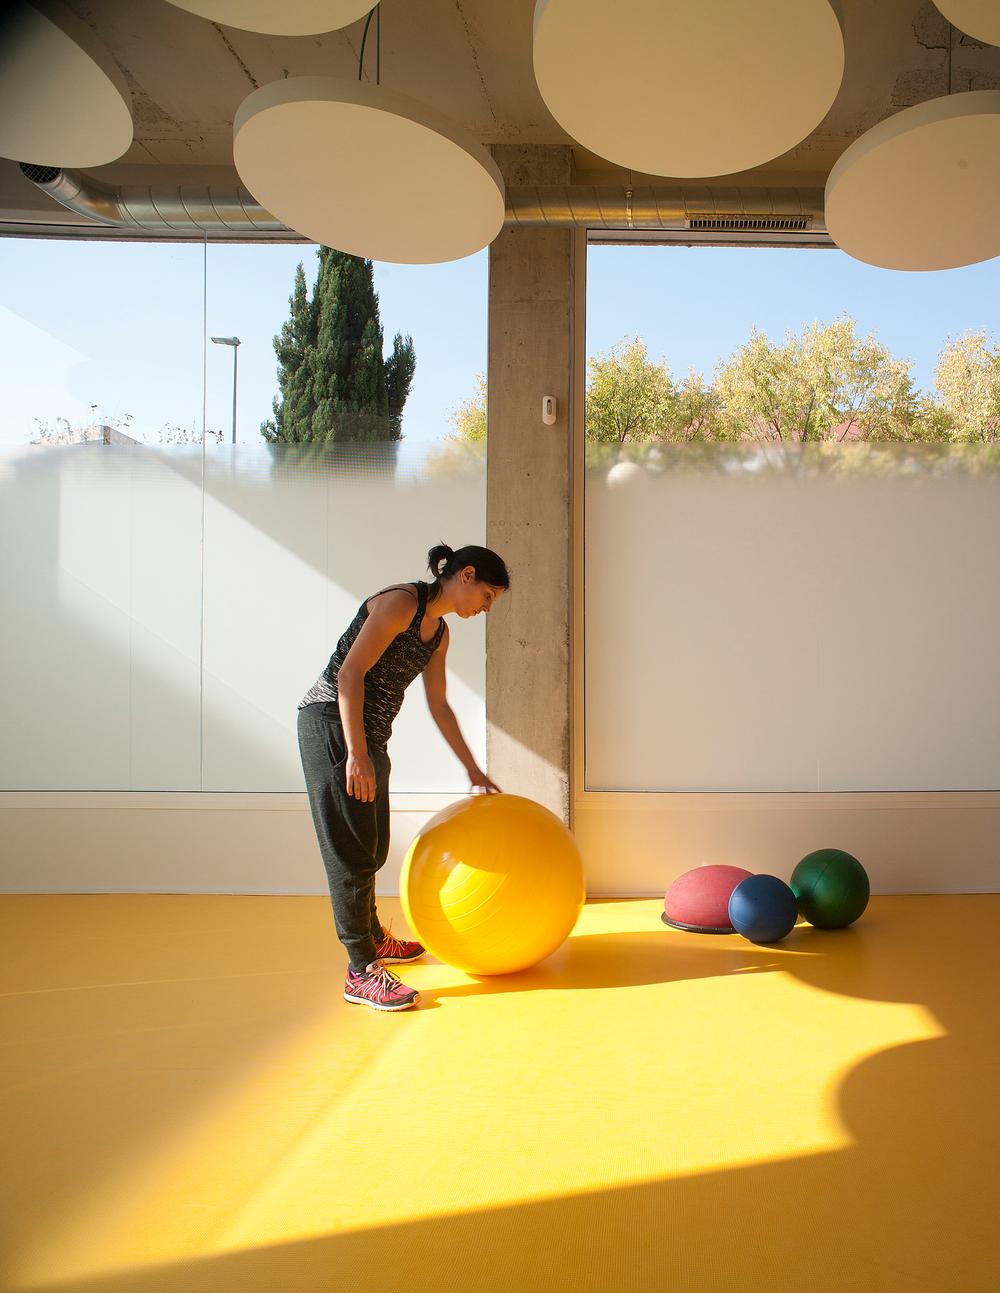 Bold splashes of colour have been used throughout the gym, contrasting with the white walls and exposed cement. Large windows allow natural light to flood the space